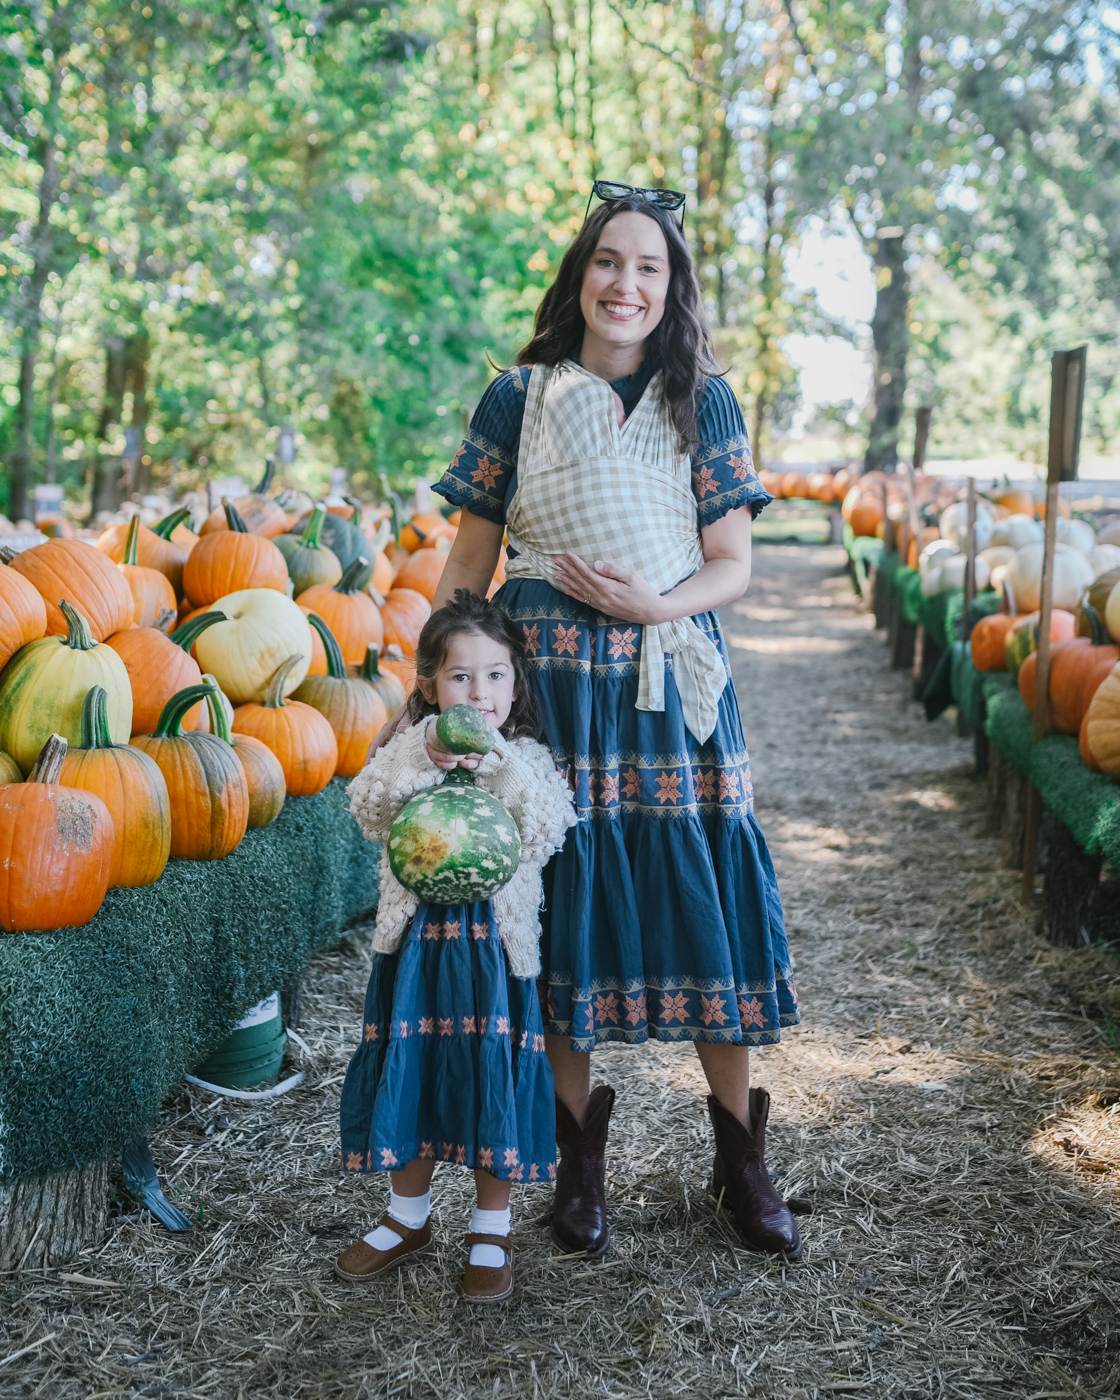 Top Style Tips For Mom & Daughter Matching Dresses